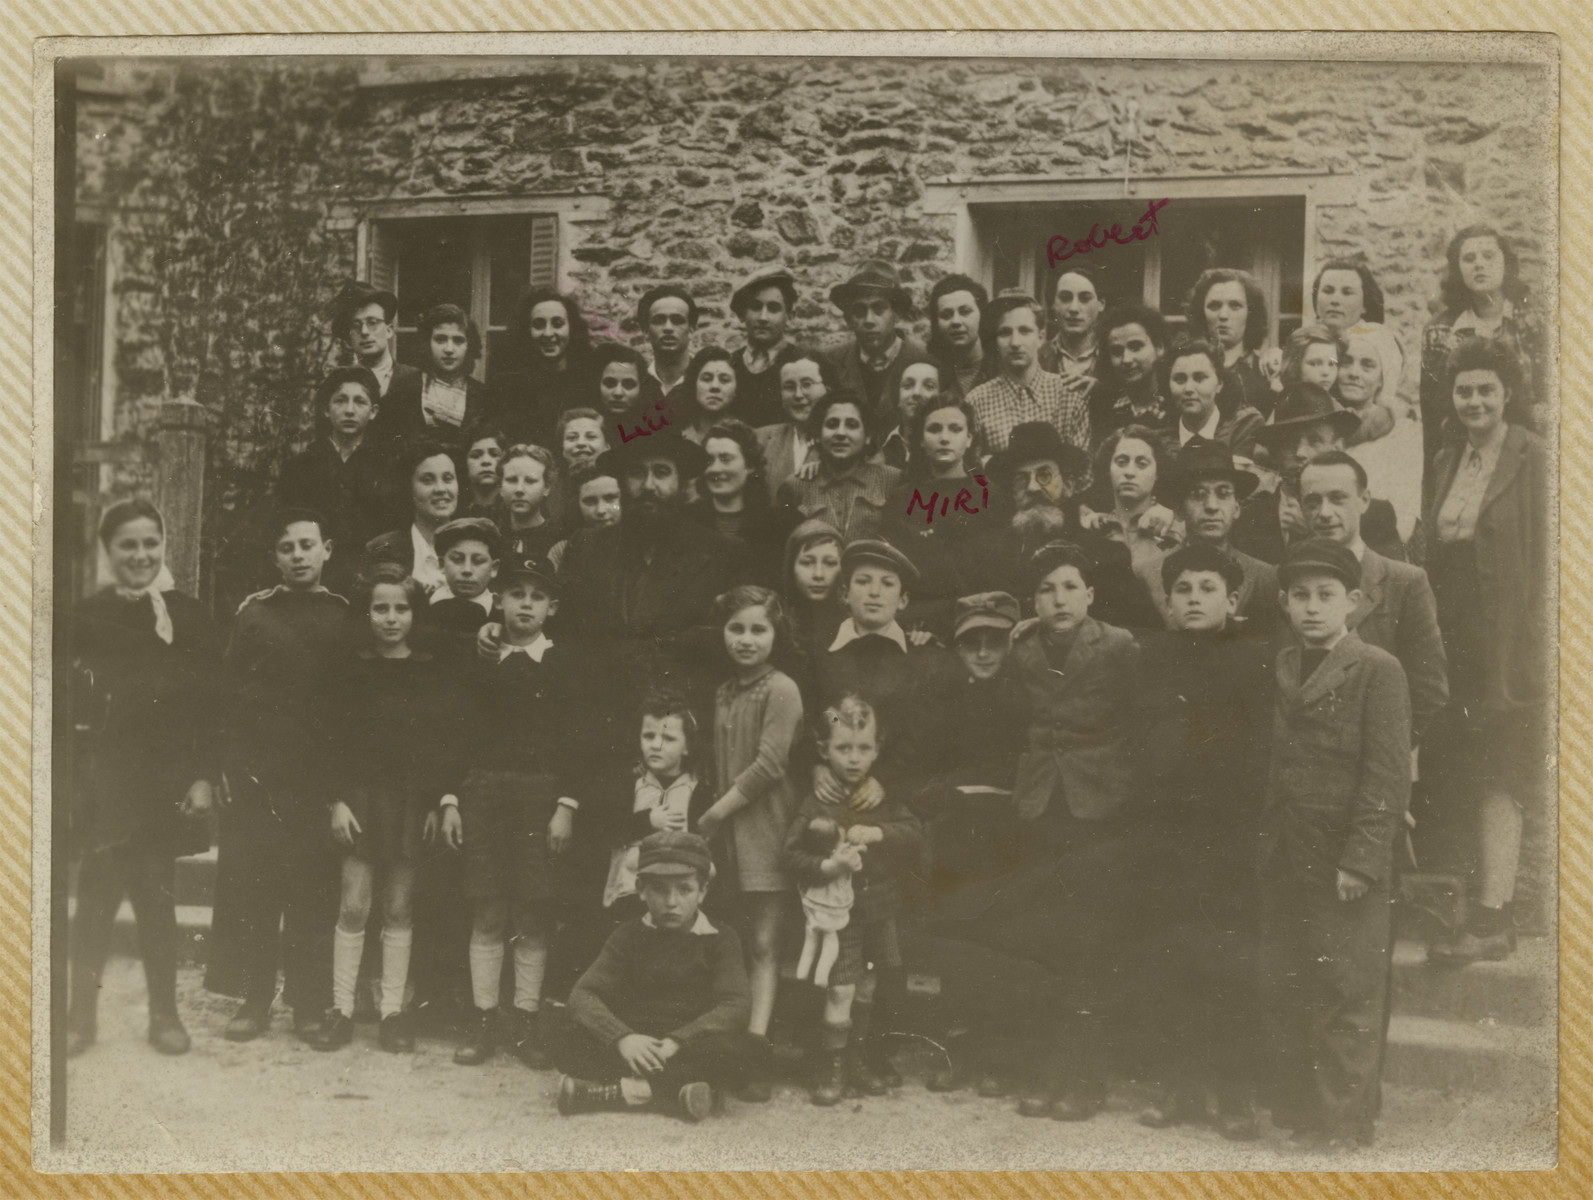 Group portrait of men, women and children in the Barbizon displaced persons camp in France.

Miriam Ofer is pictured in the center to the left of the rabbi.  Her brother Robert is standing on the top row, fourth from the right.